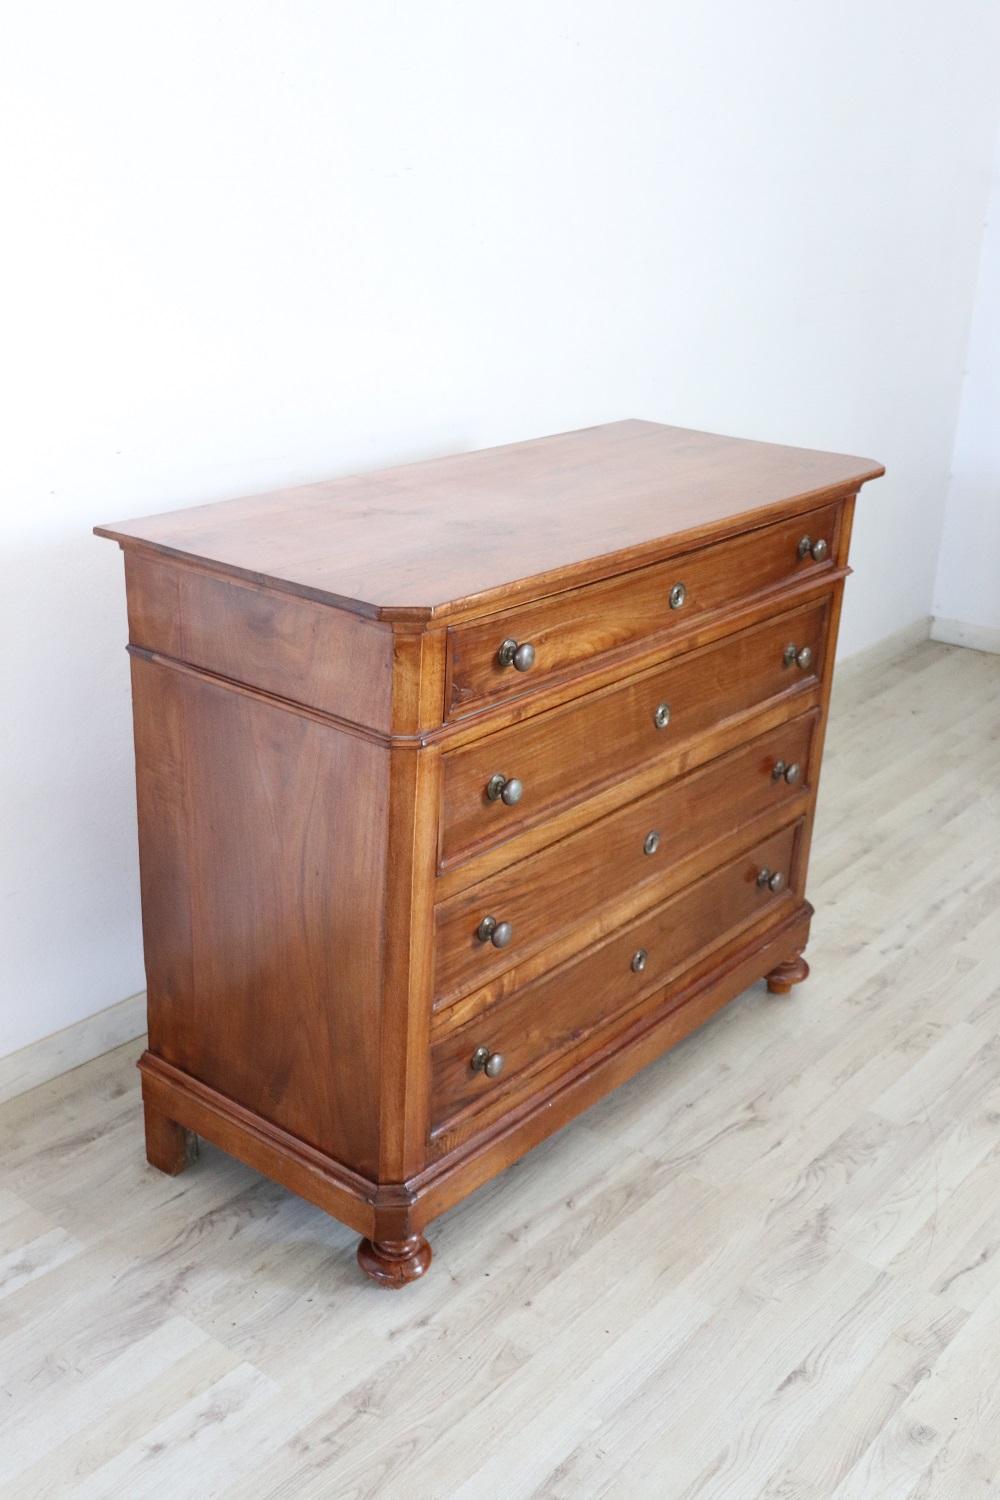 Rare and fine quality Italian Louis Philippe antique dresser, 1850s. Precious solid walnut wood. Equipped with four comfortable drawers. Lined with paper. Very simple and linear, perfect even in a modern furniture. Used condition perfect condition